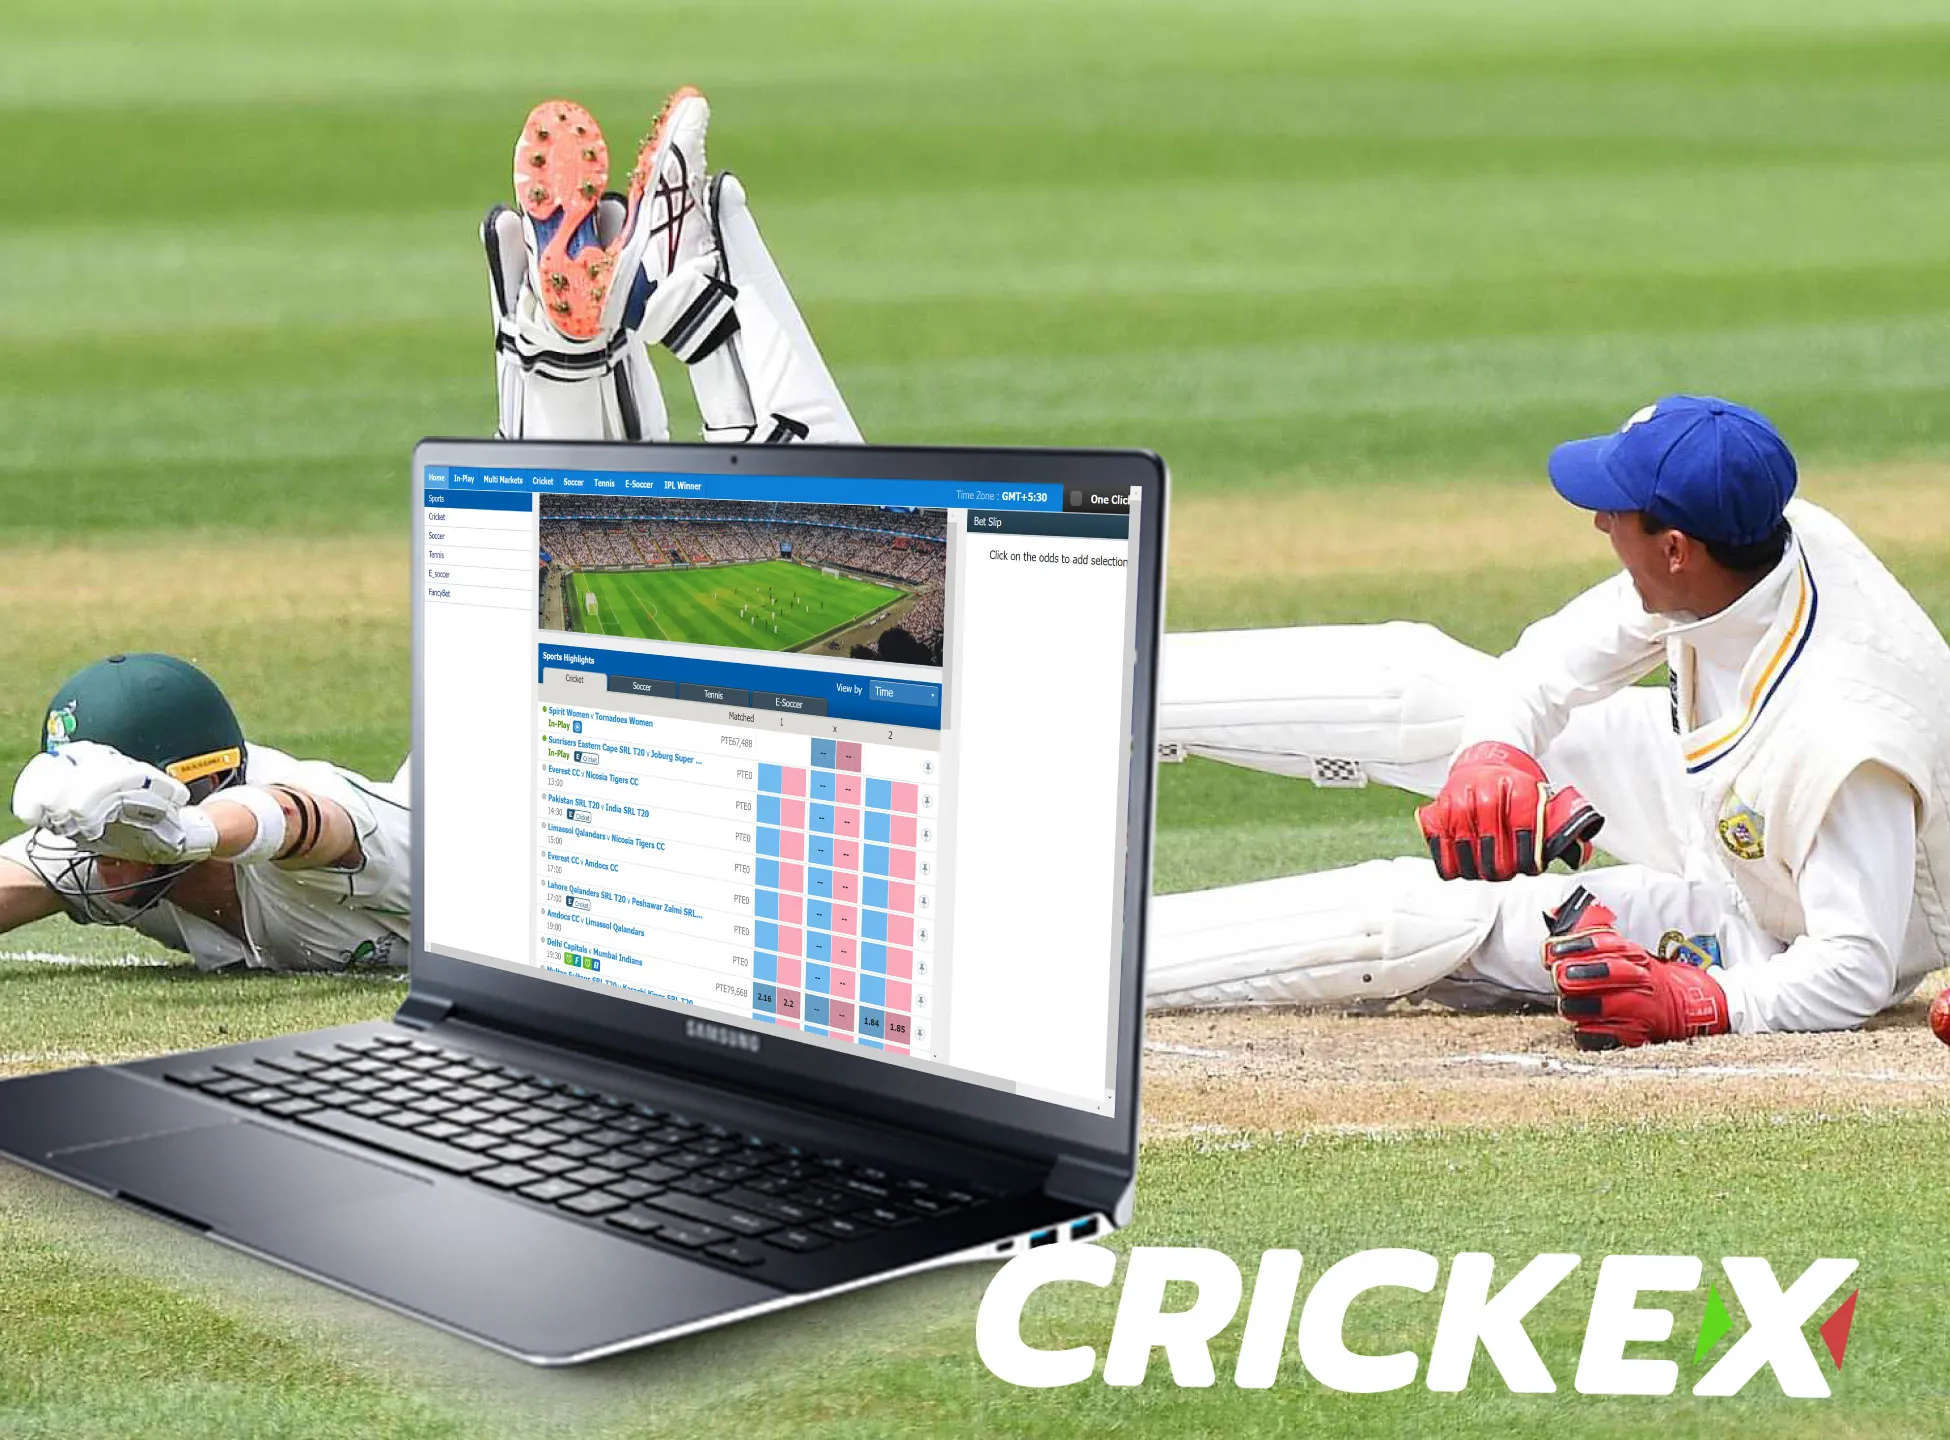 Crickex pays much attention on cricket betting and allows betting on rupees.